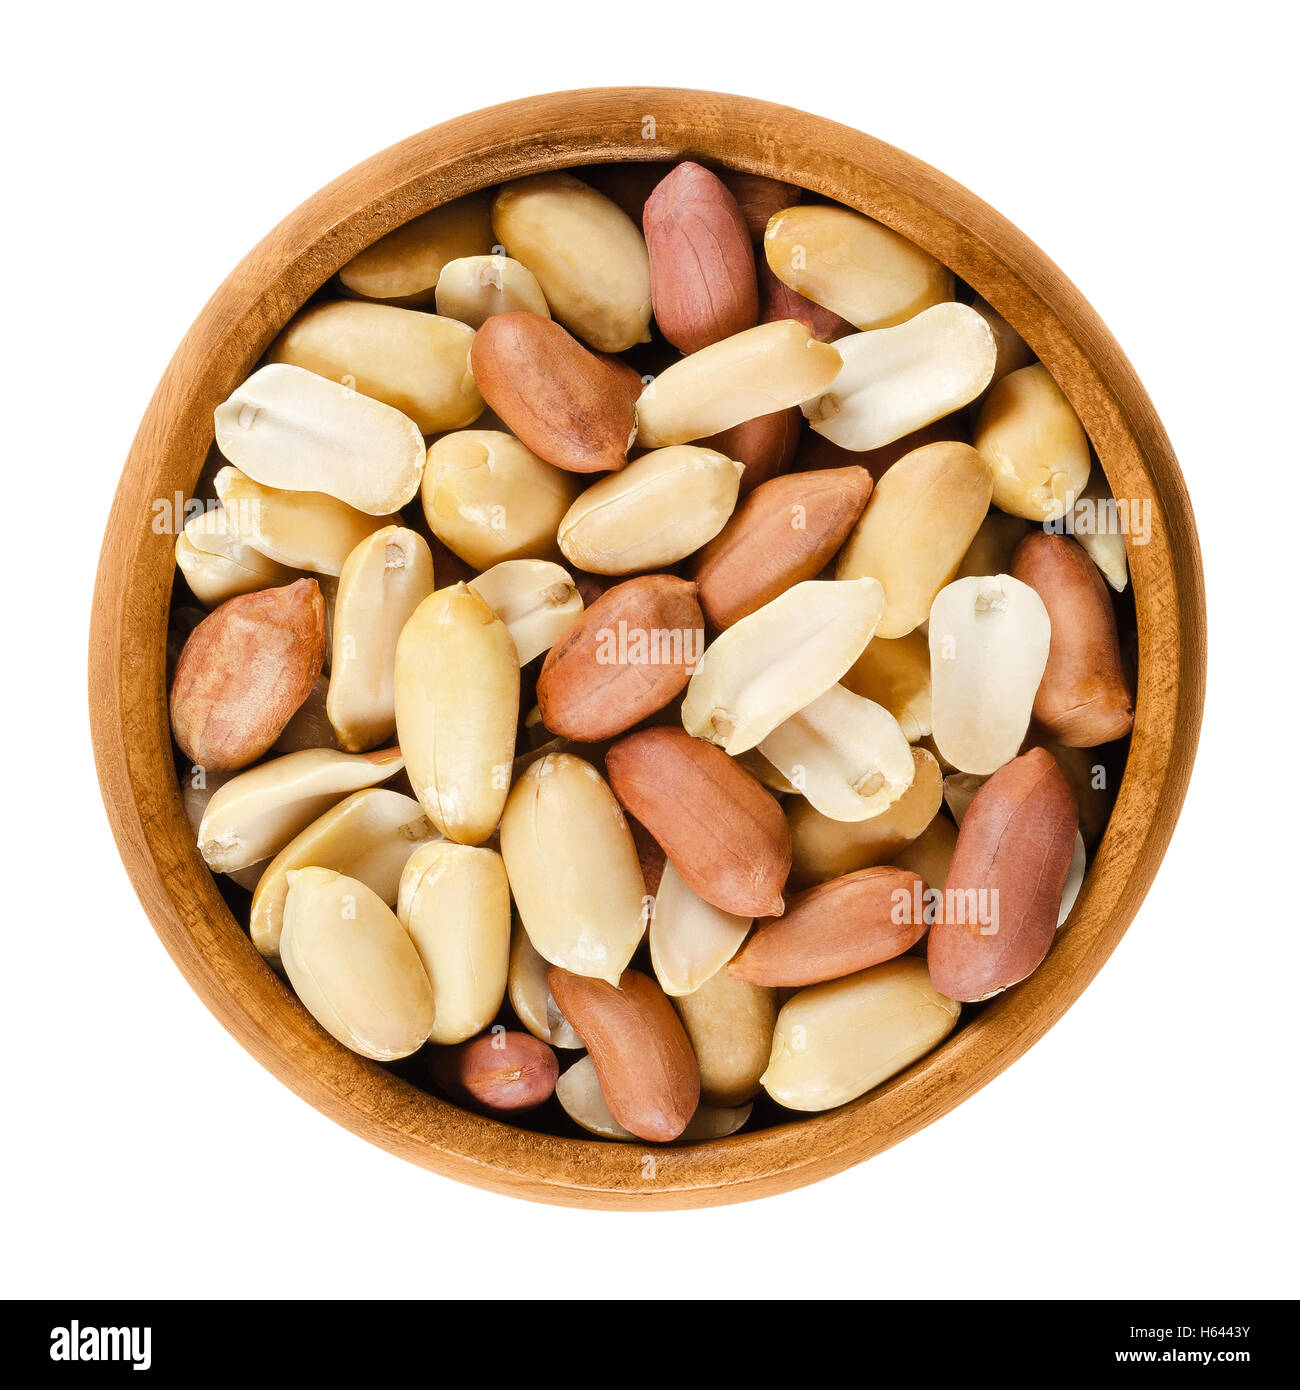 Shelled peanuts in wooden bowl on white background. Dry roasted Arachis hypogaea, also called groundnut and goober. Stock Photo